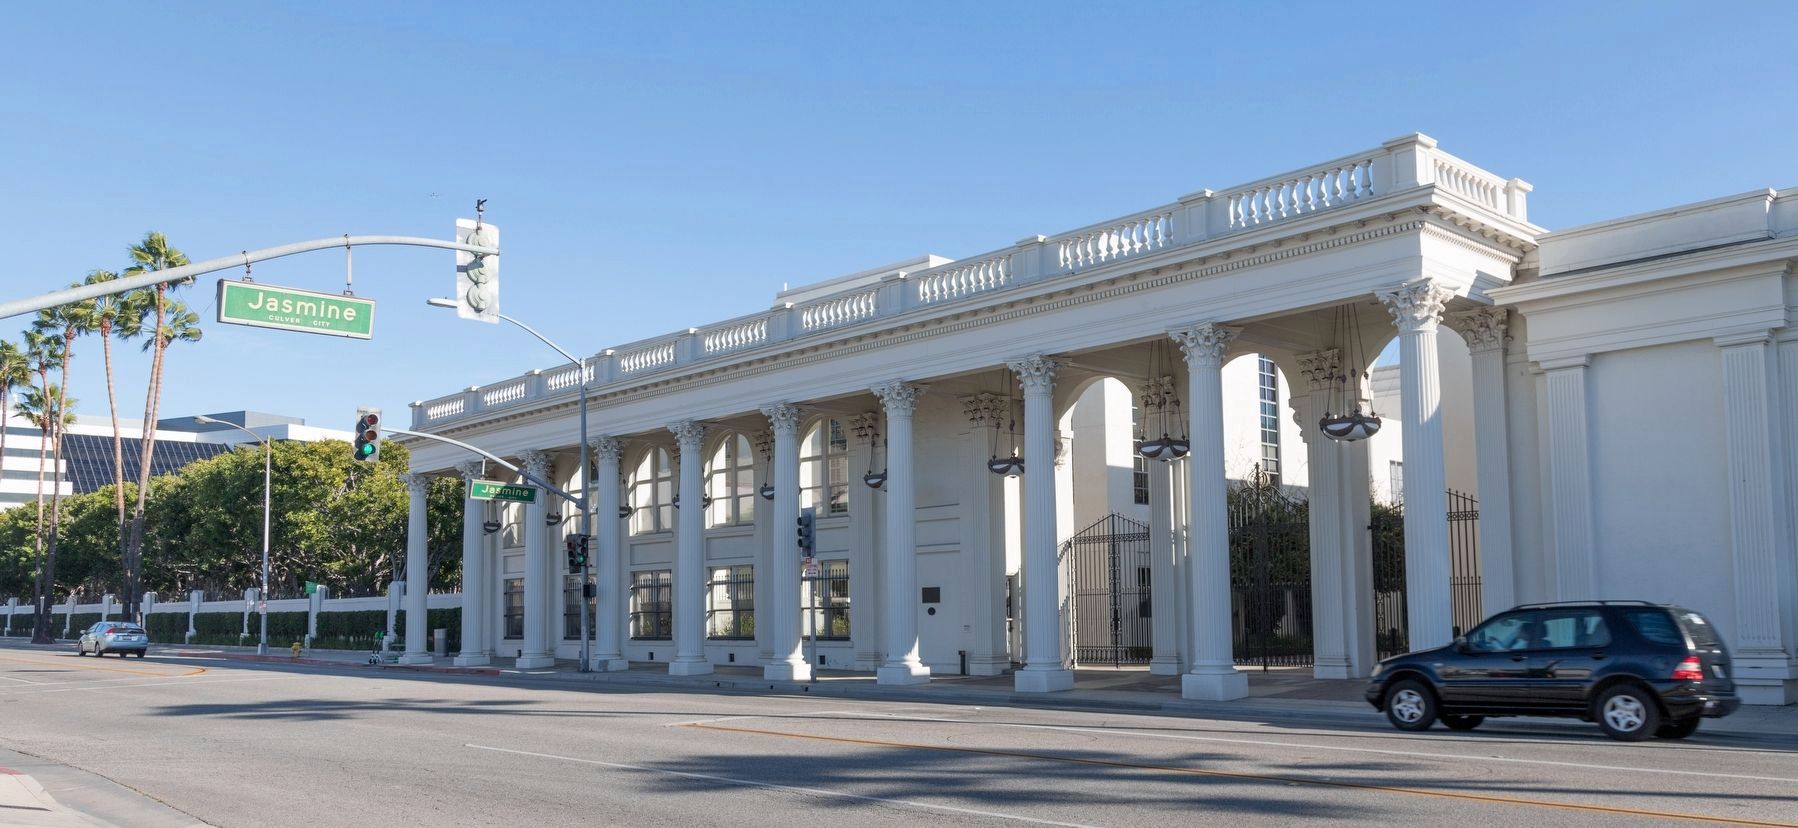 Sony Pictures Studios Colonnade Entrance on Washington Boulevard image. Click for full size.